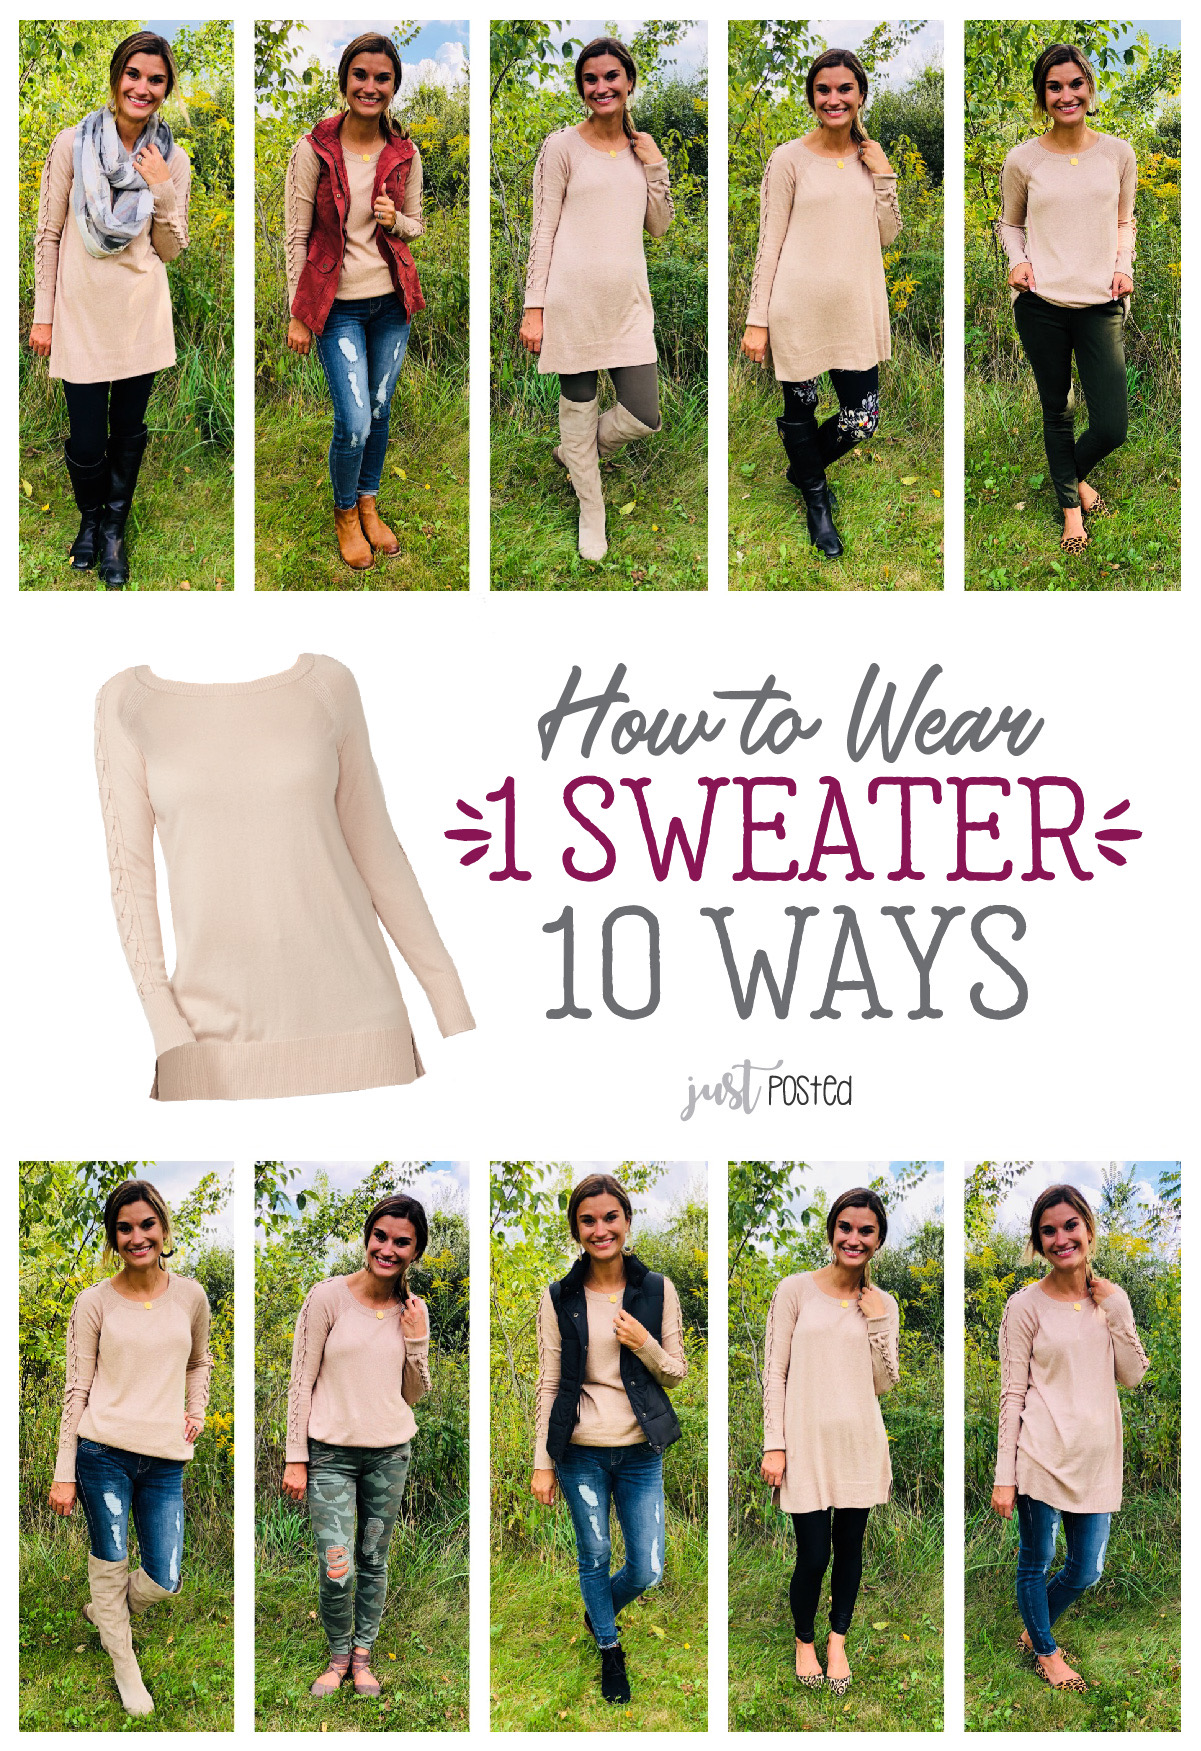 How to Wear 1 Tunic 10 Ways – Just Posted